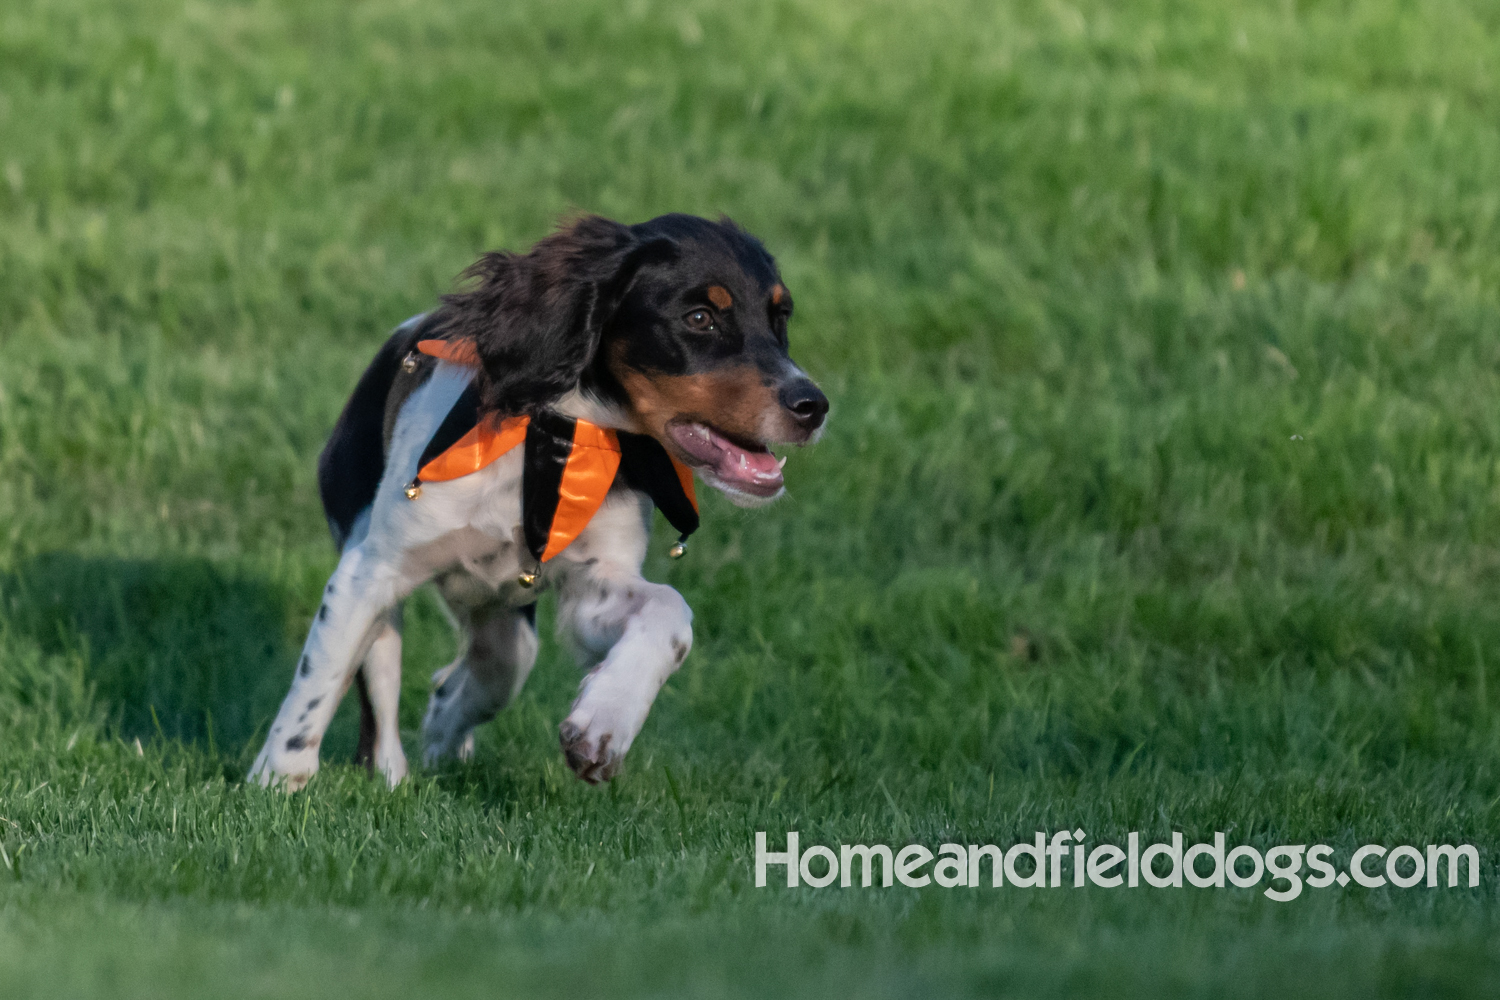 Tricolor french brittany puppies playing with toys in a field wearing halloween costumes